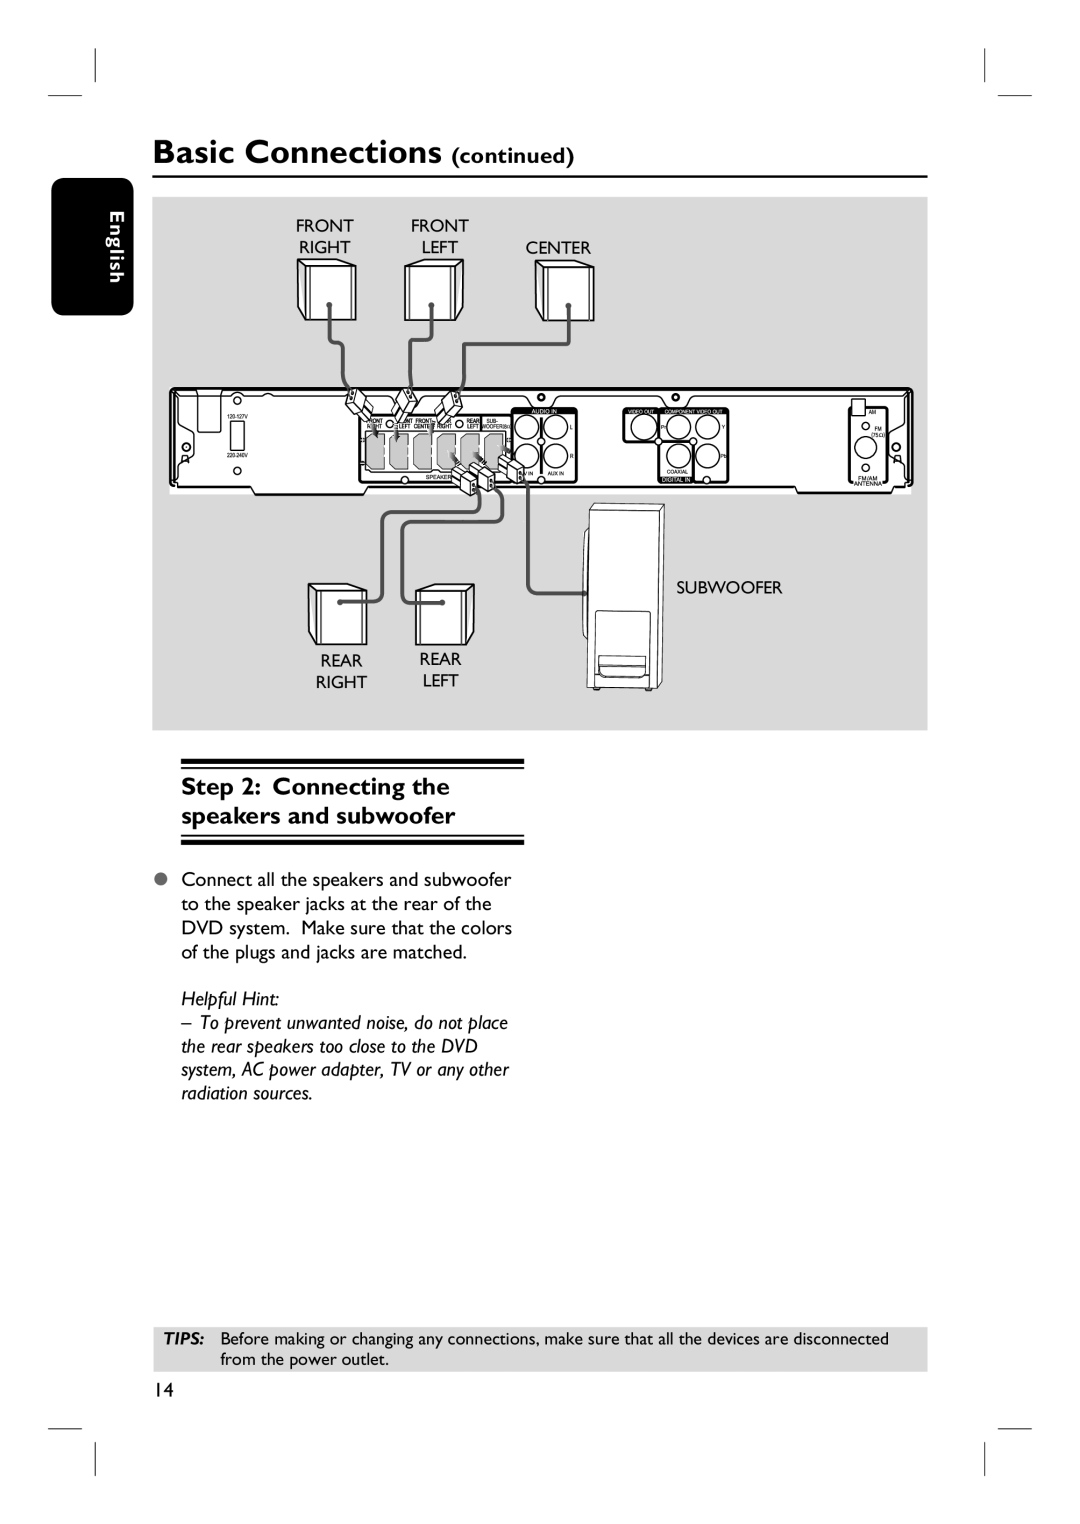 Magnavox MRD100 user manual Basic Connections continued, Connecting the speakers and subwoofer, Helpful Hint, English 